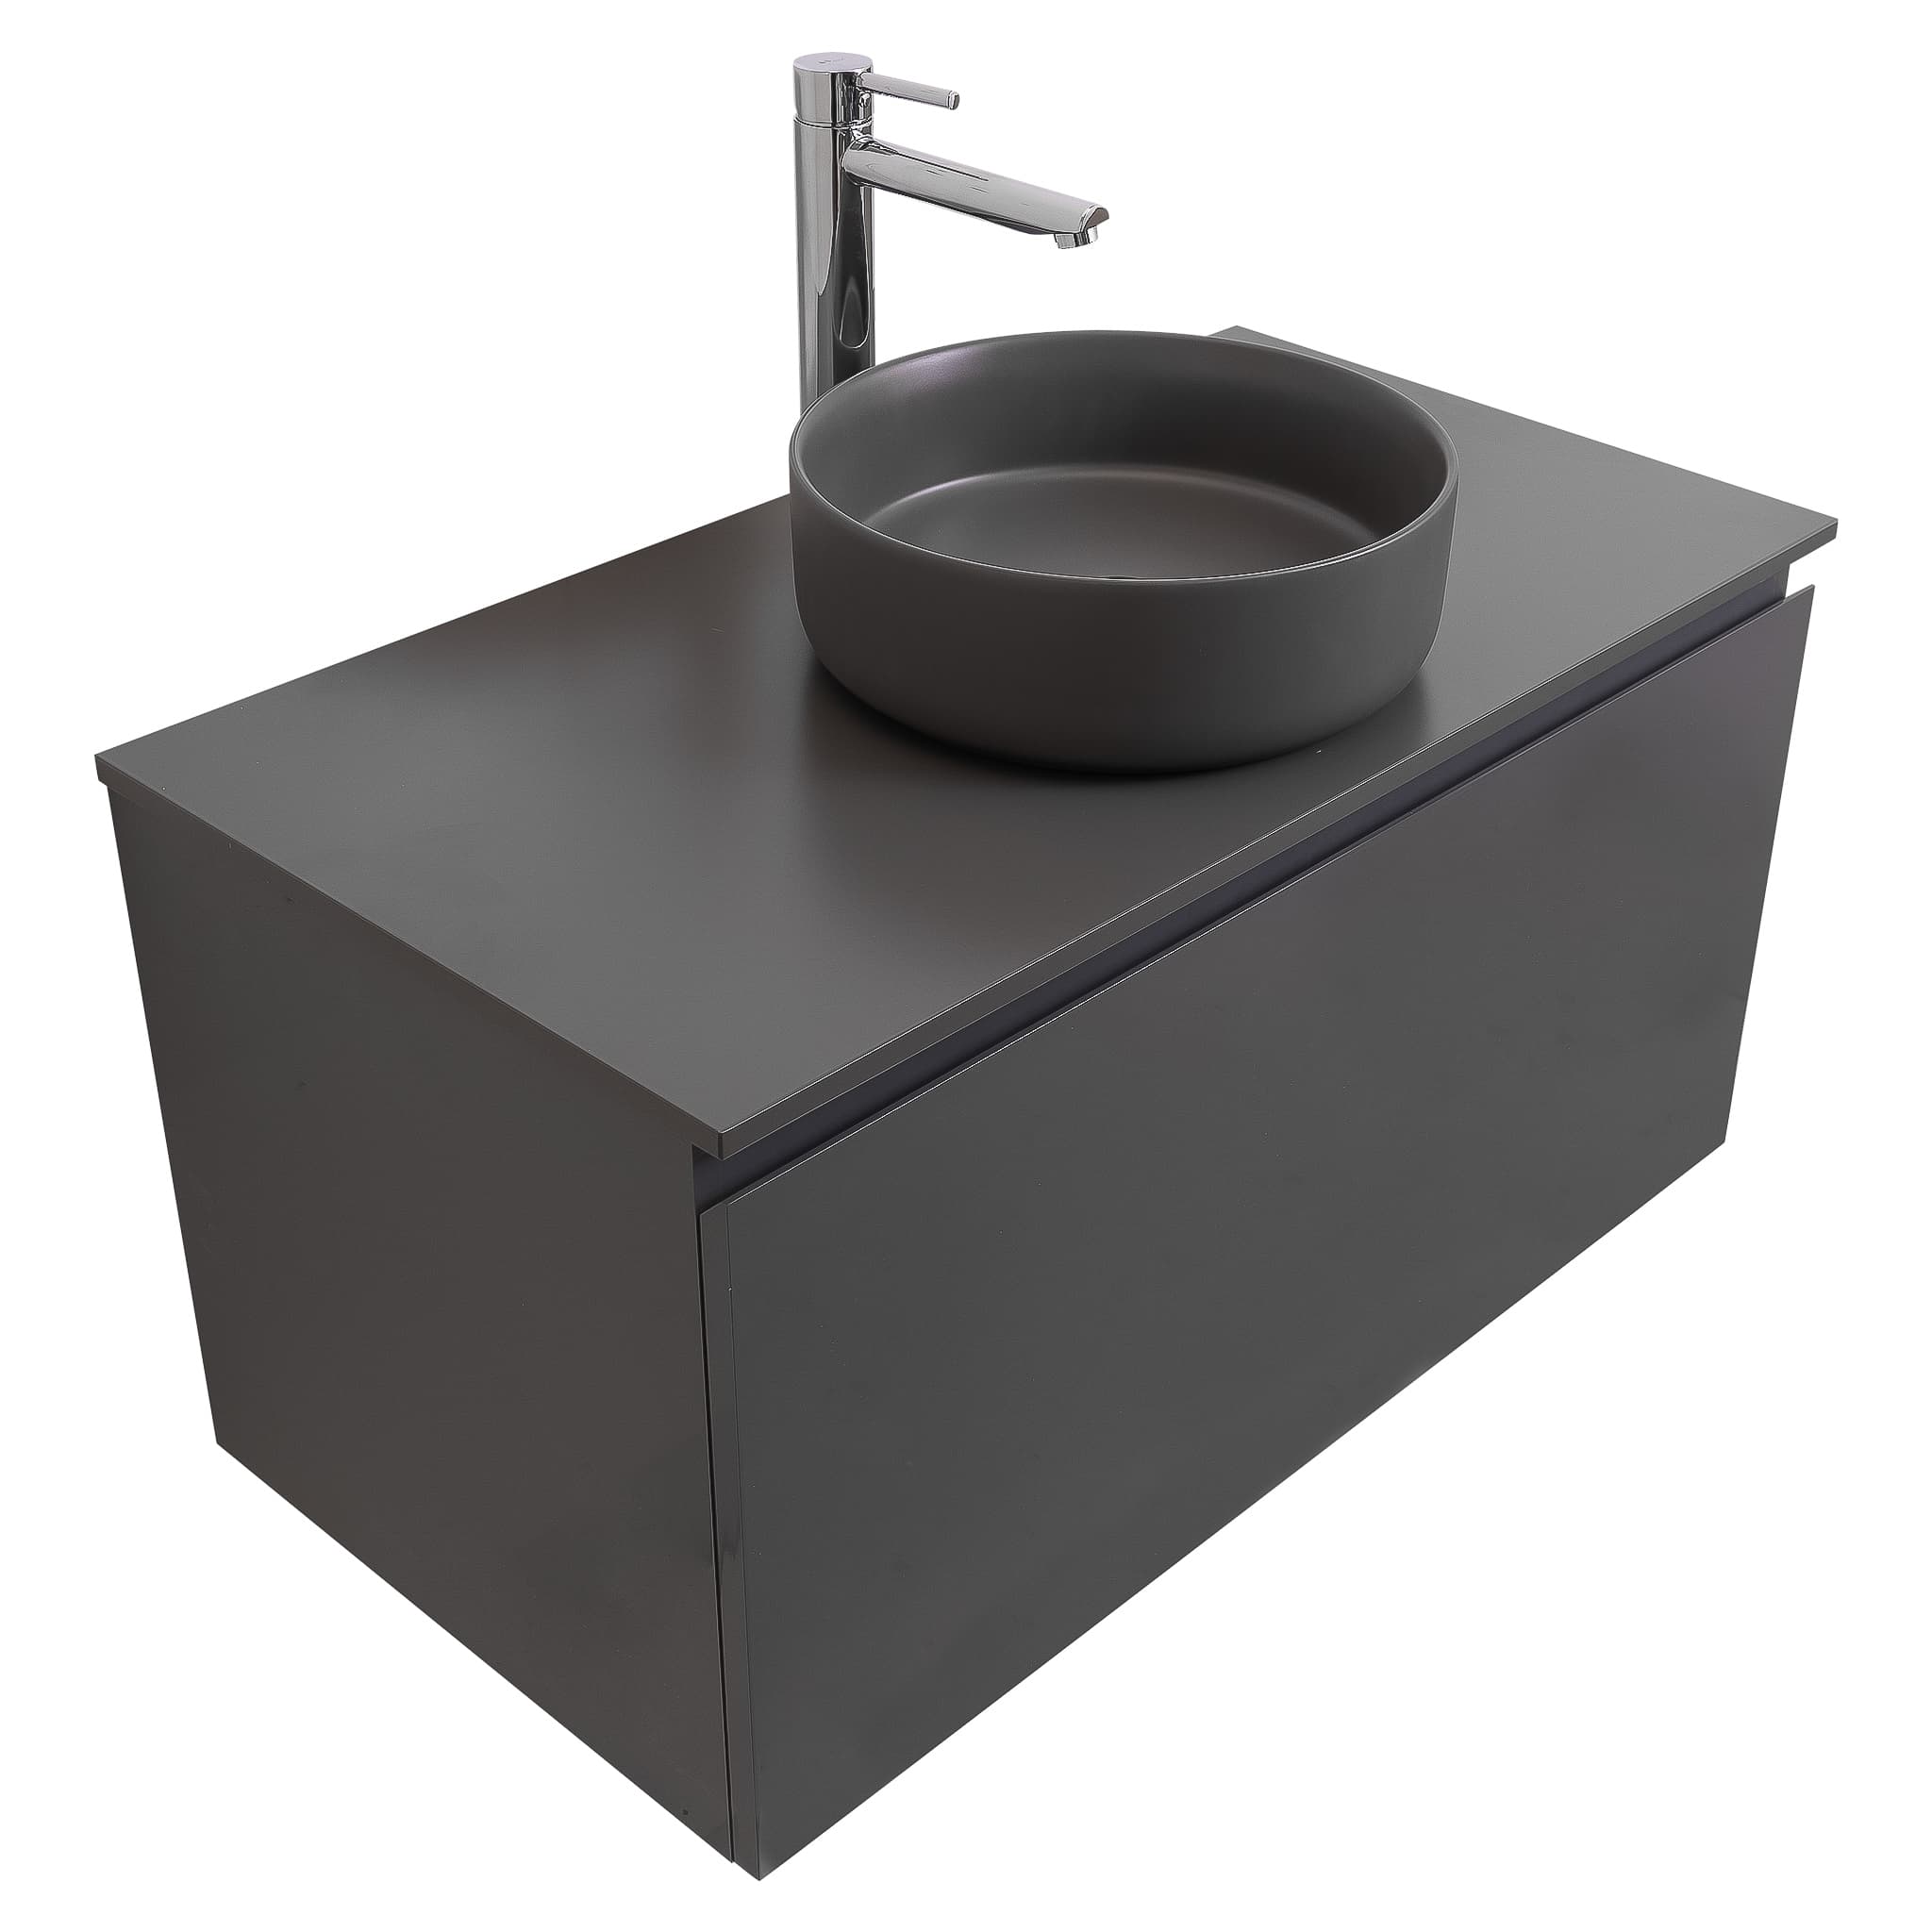 Venice 35.5 Anthracite High Gloss Cabinet, Ares Grey Ceniza Top And Ares Grey Ceniza Ceramic Basin, Wall Mounted Modern Vanity Set